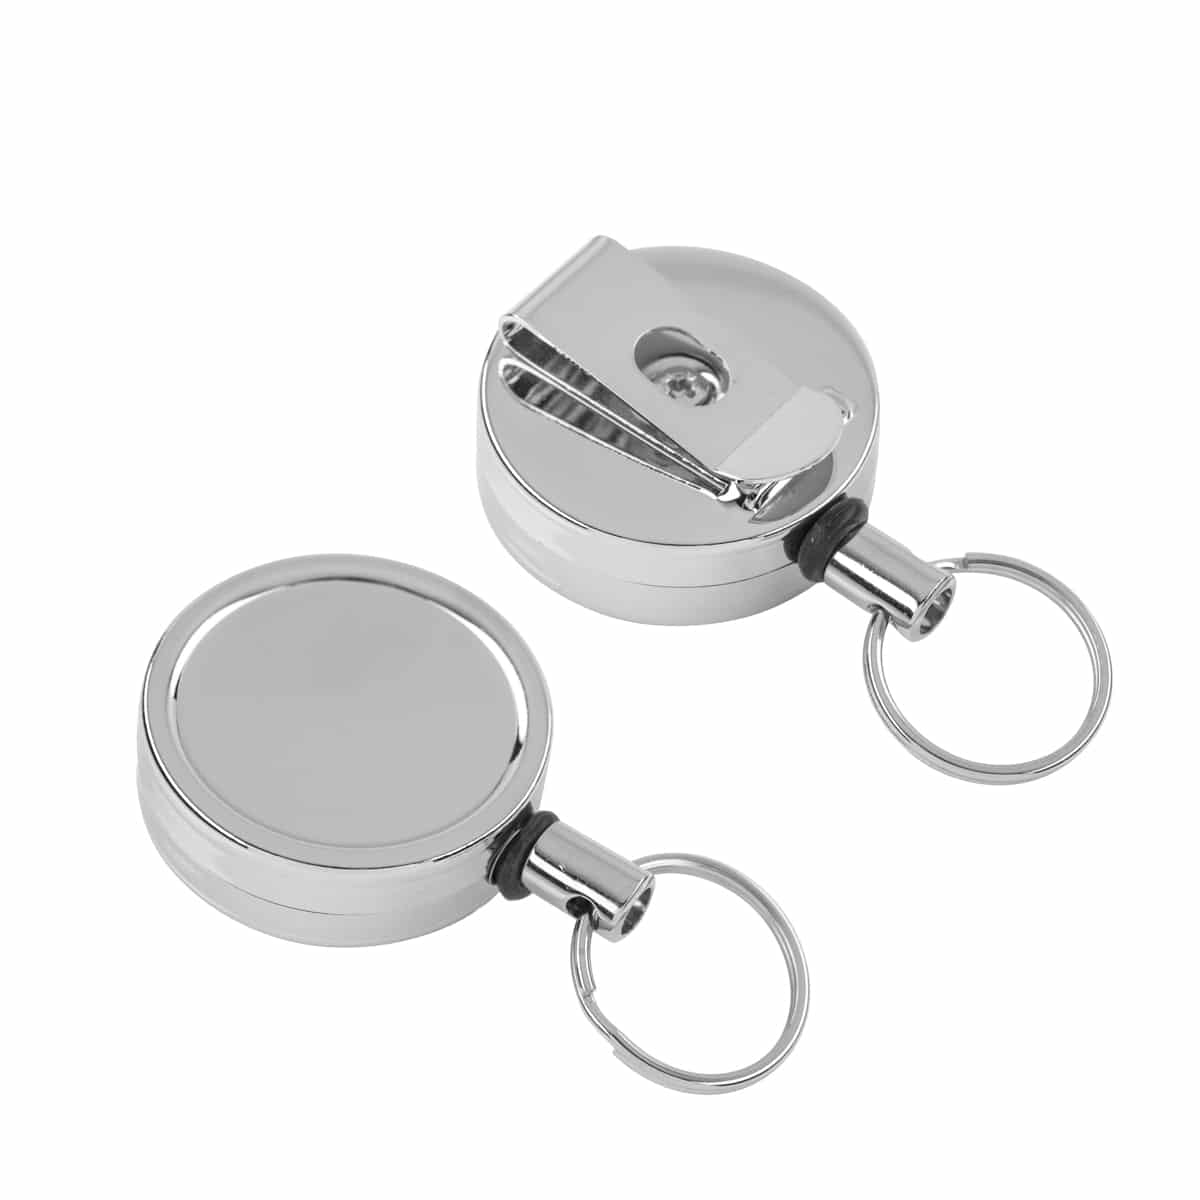 ID Card Accessories at Red Strawberry Solutions - Red Strawberry Solutions